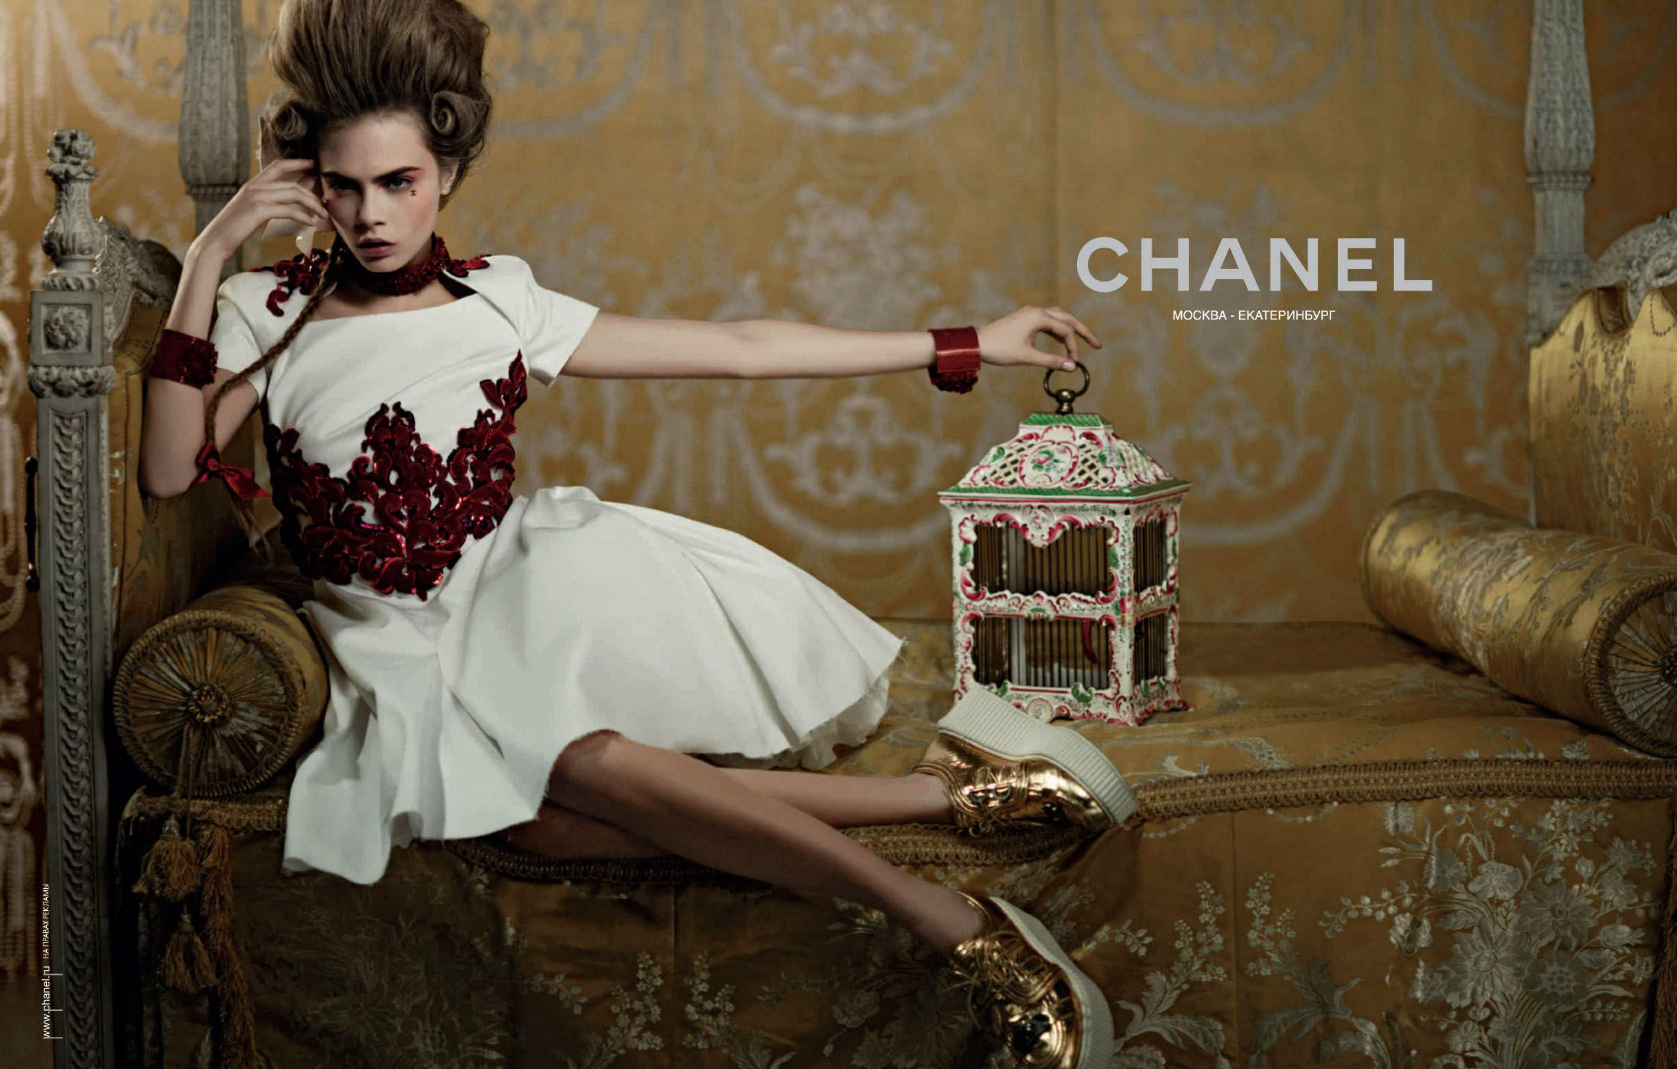 Chanel launches 2013/2014 Cruise collection in Singapore